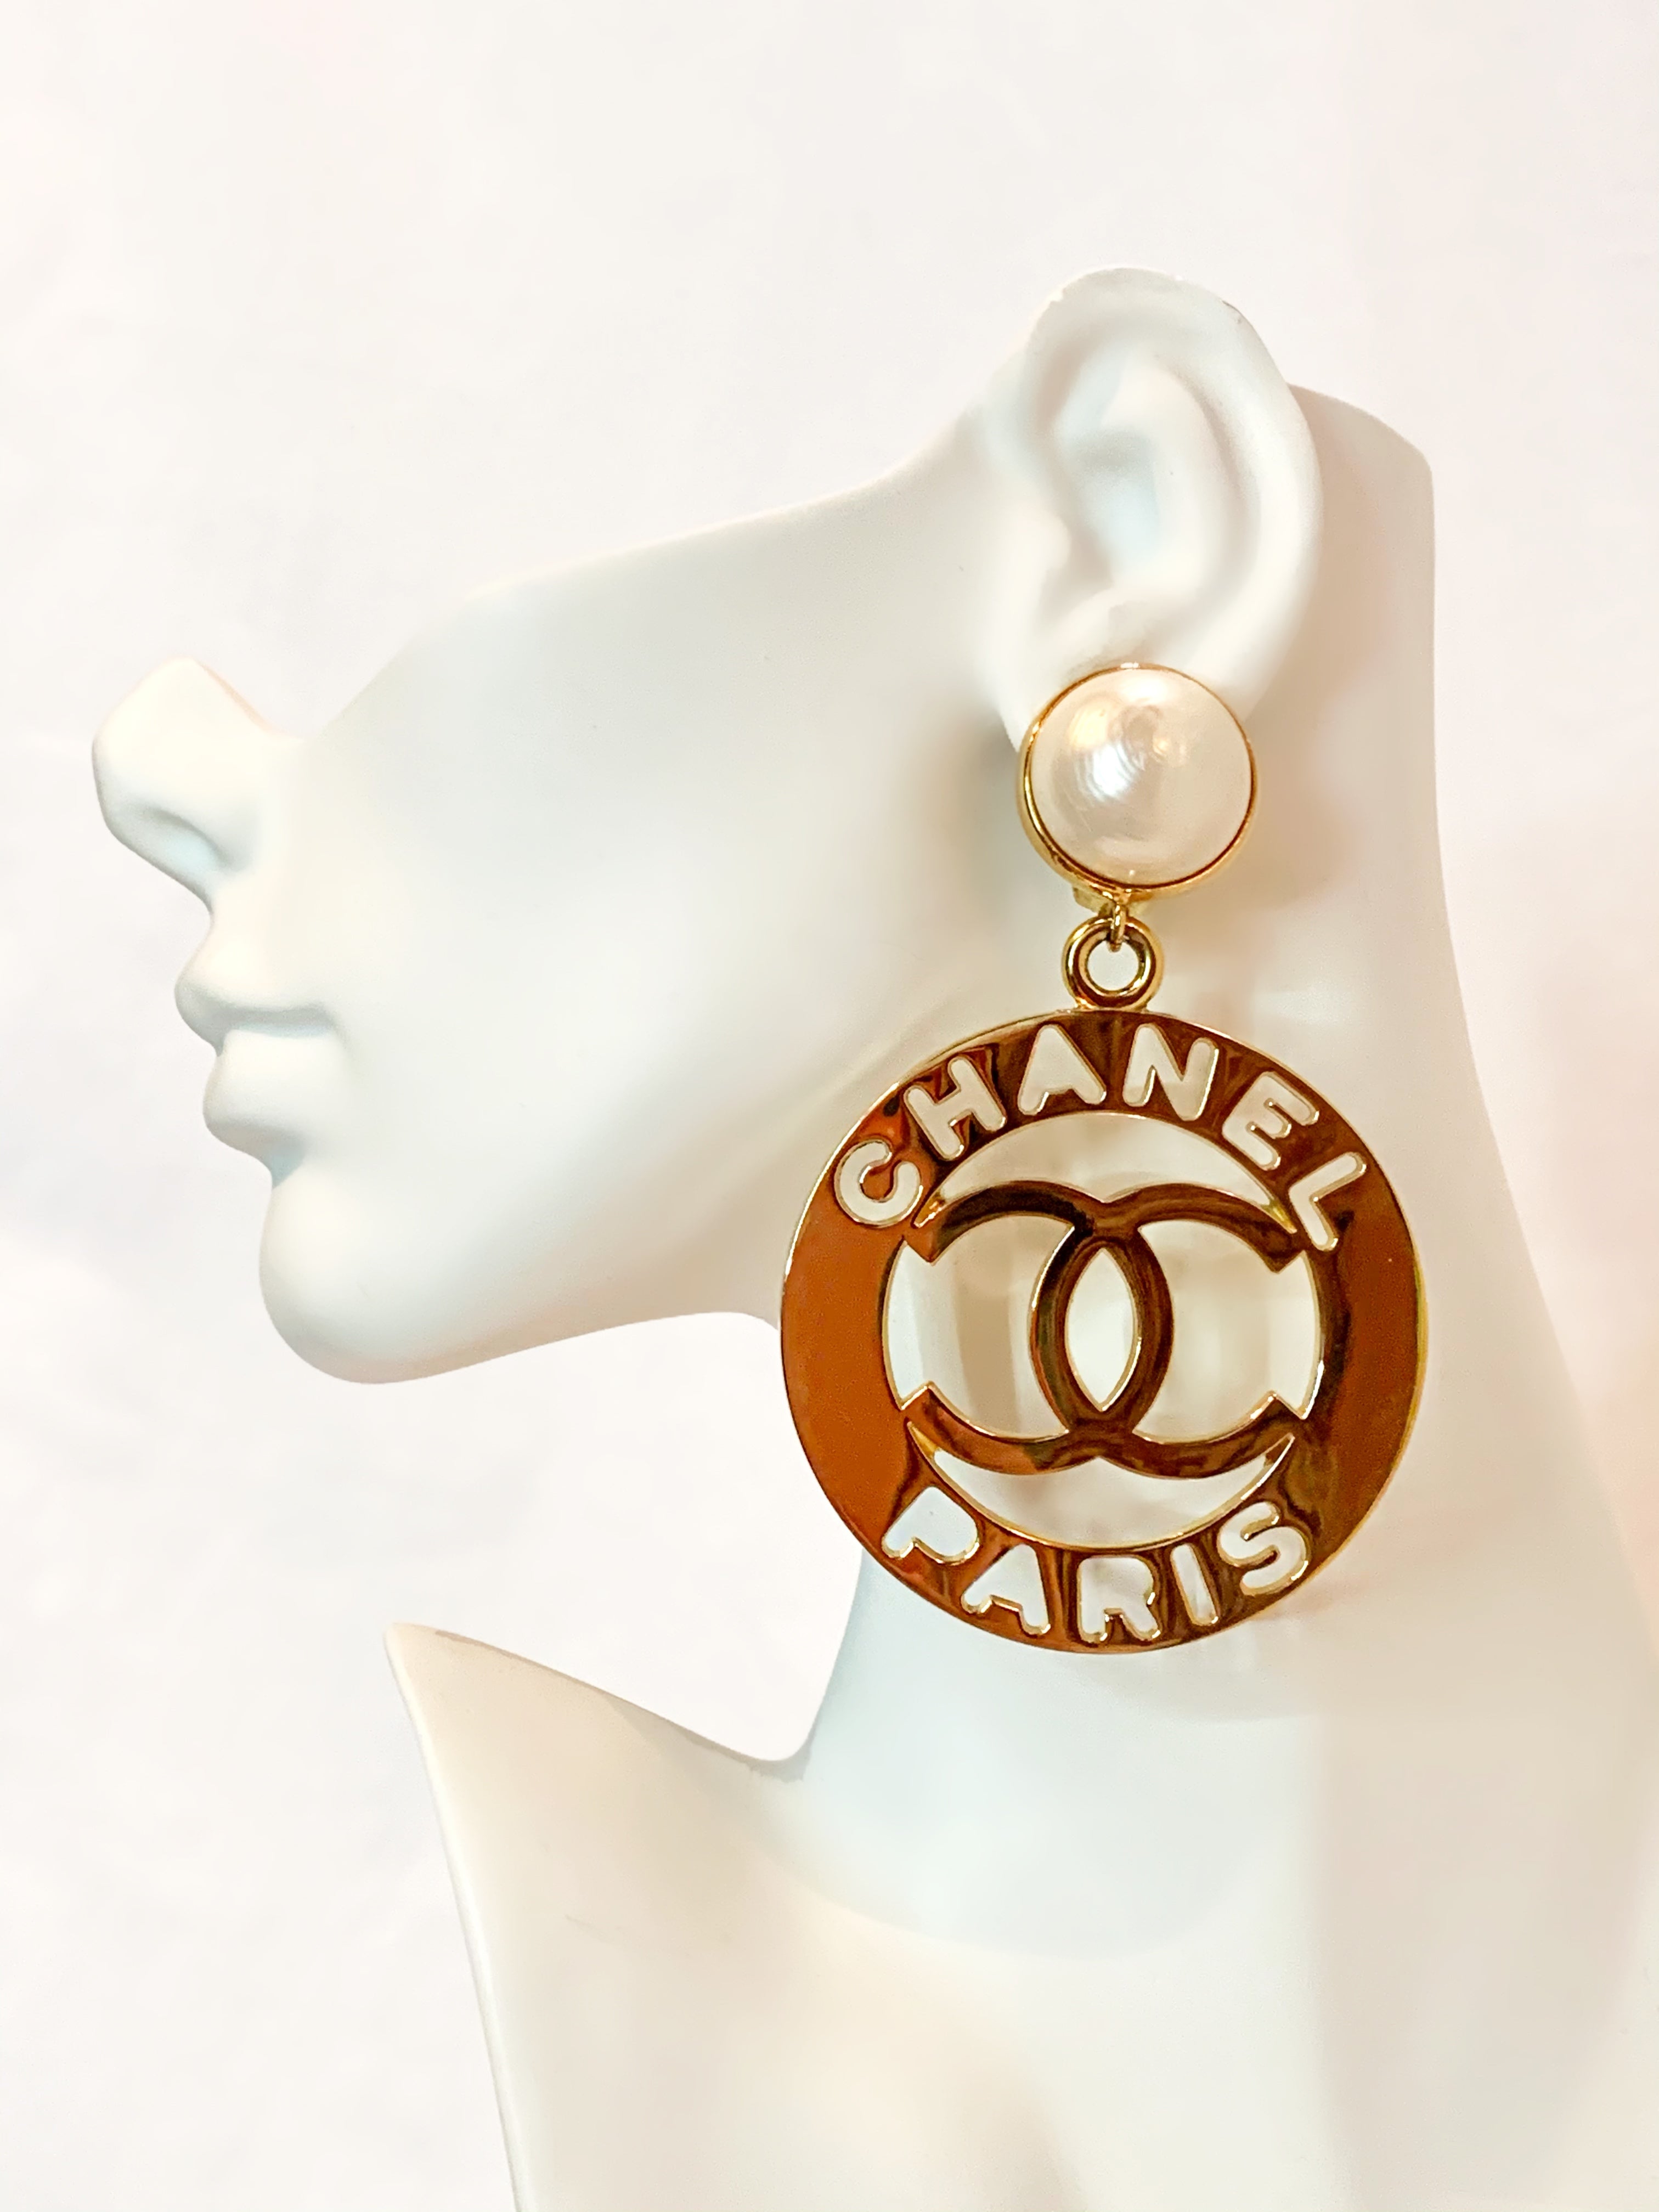 ICONIC CHANEL MASSIVE GRIPOIX GLASS PEARL CC EARRINGS – The Paris